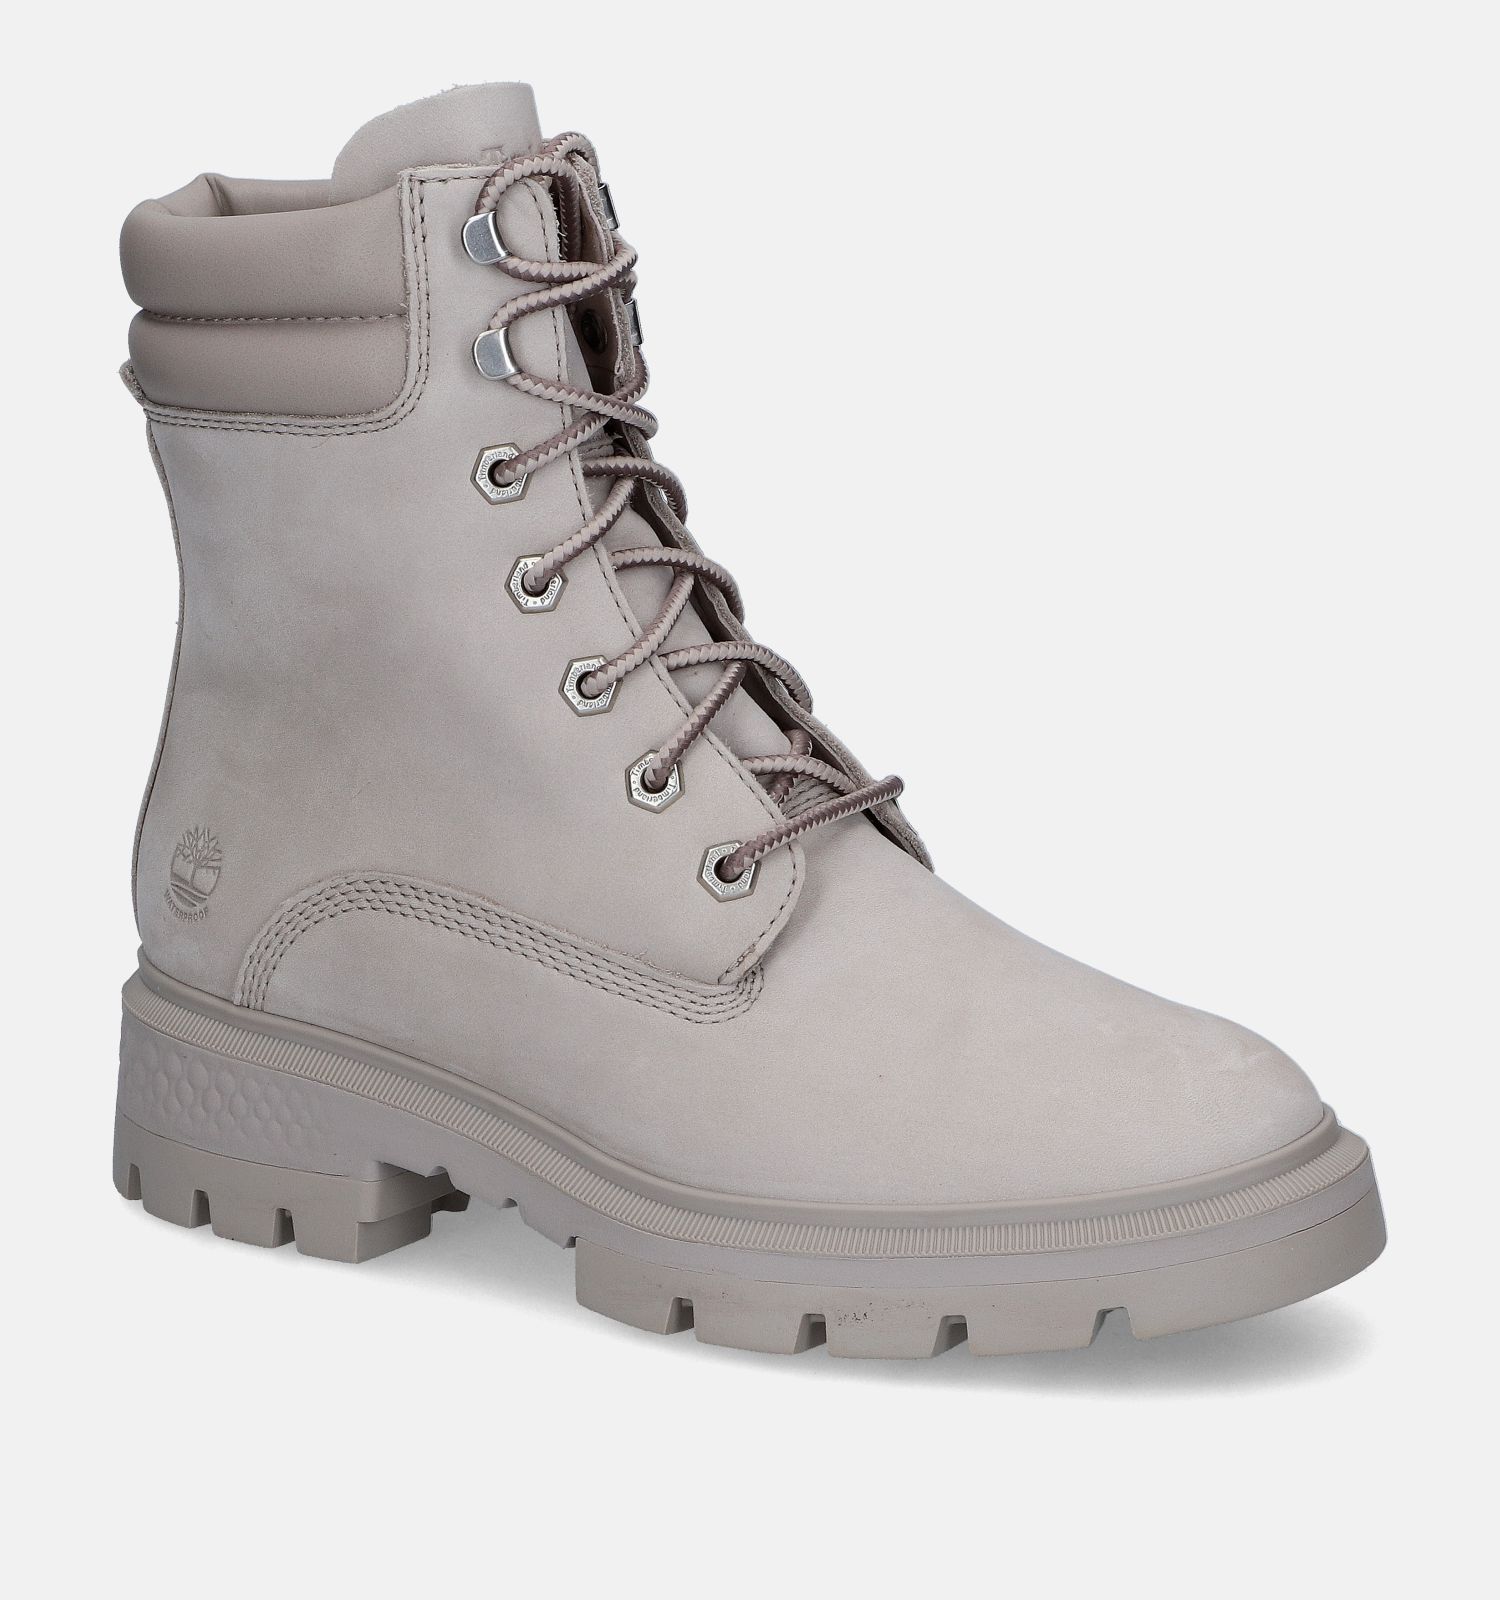 Sortie Roos Geloofsbelijdenis Timberland Cortina Valley 6IN WP Taupe Boots | Dames Boots